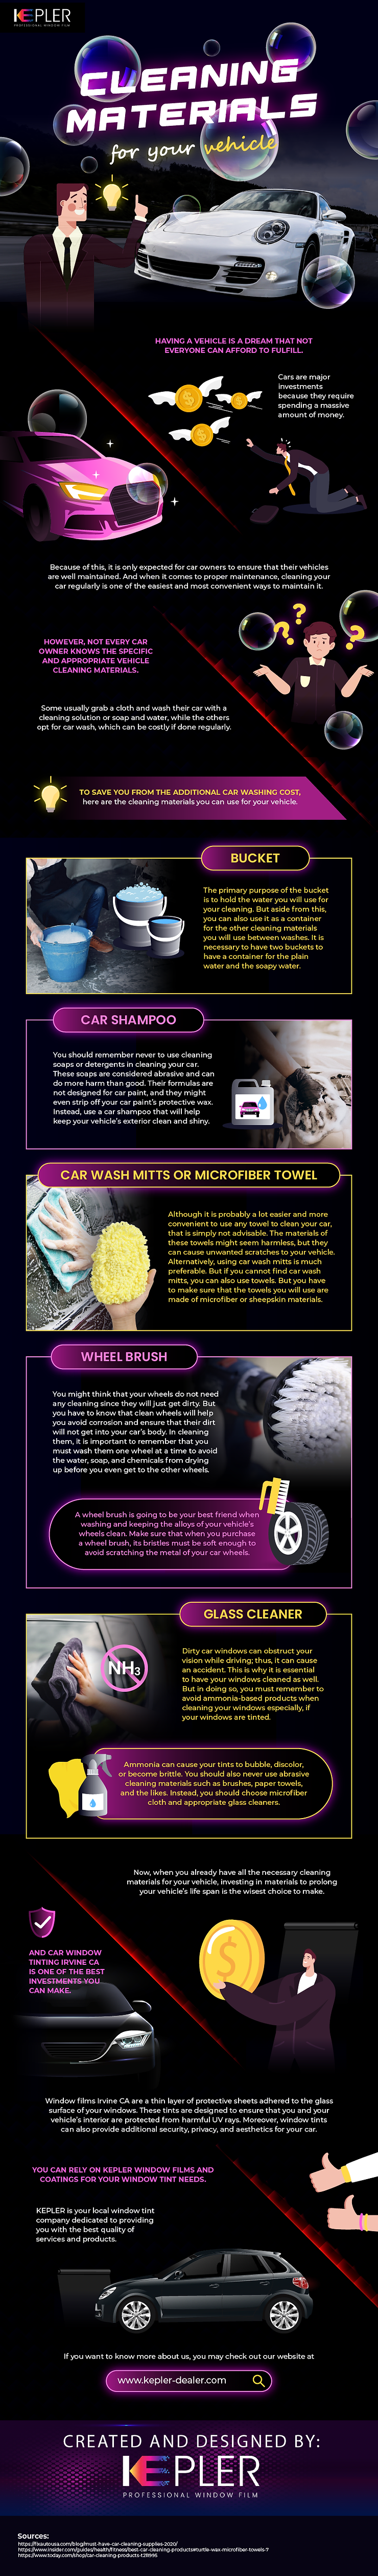 Cleaning Materials For Your Vehicle - Infographic